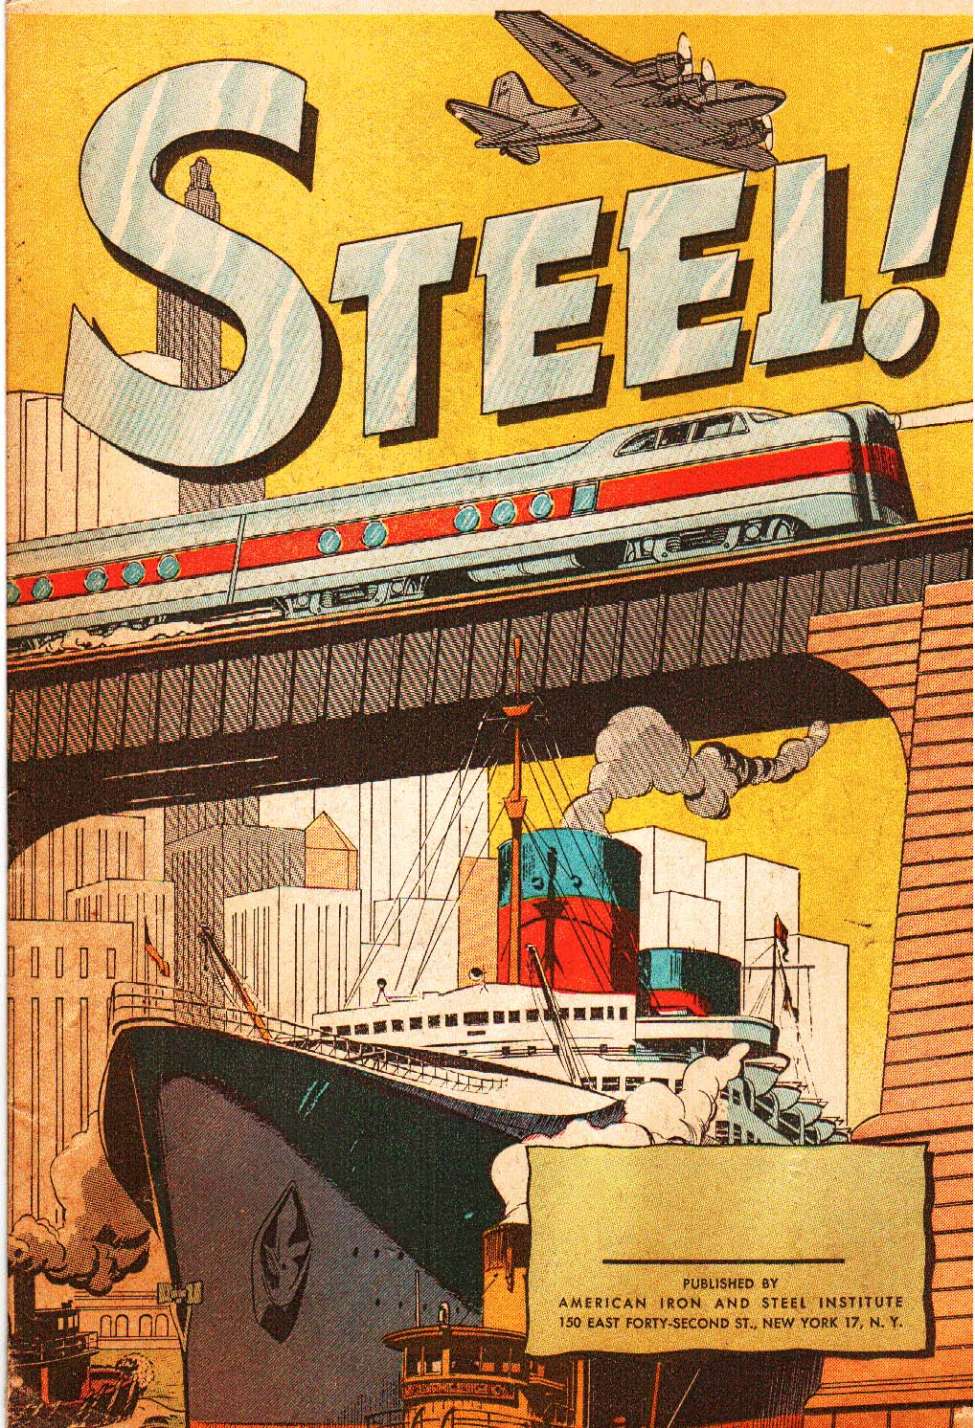 Comic Book Cover For Steel!